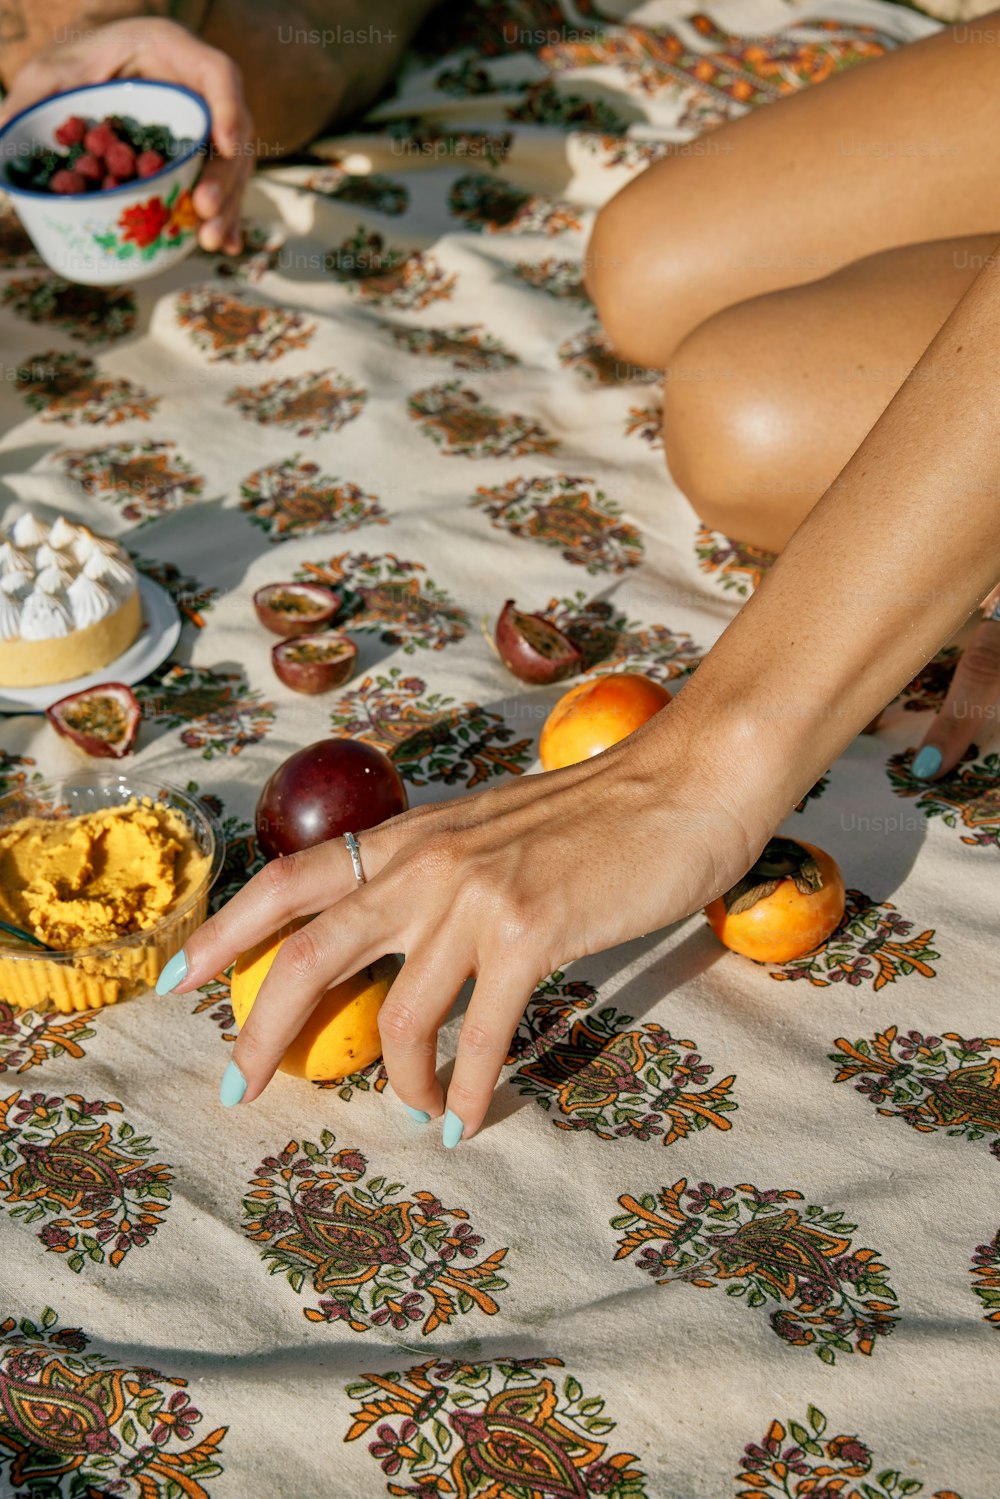 a woman sitting on a bed with a bowl of fruit